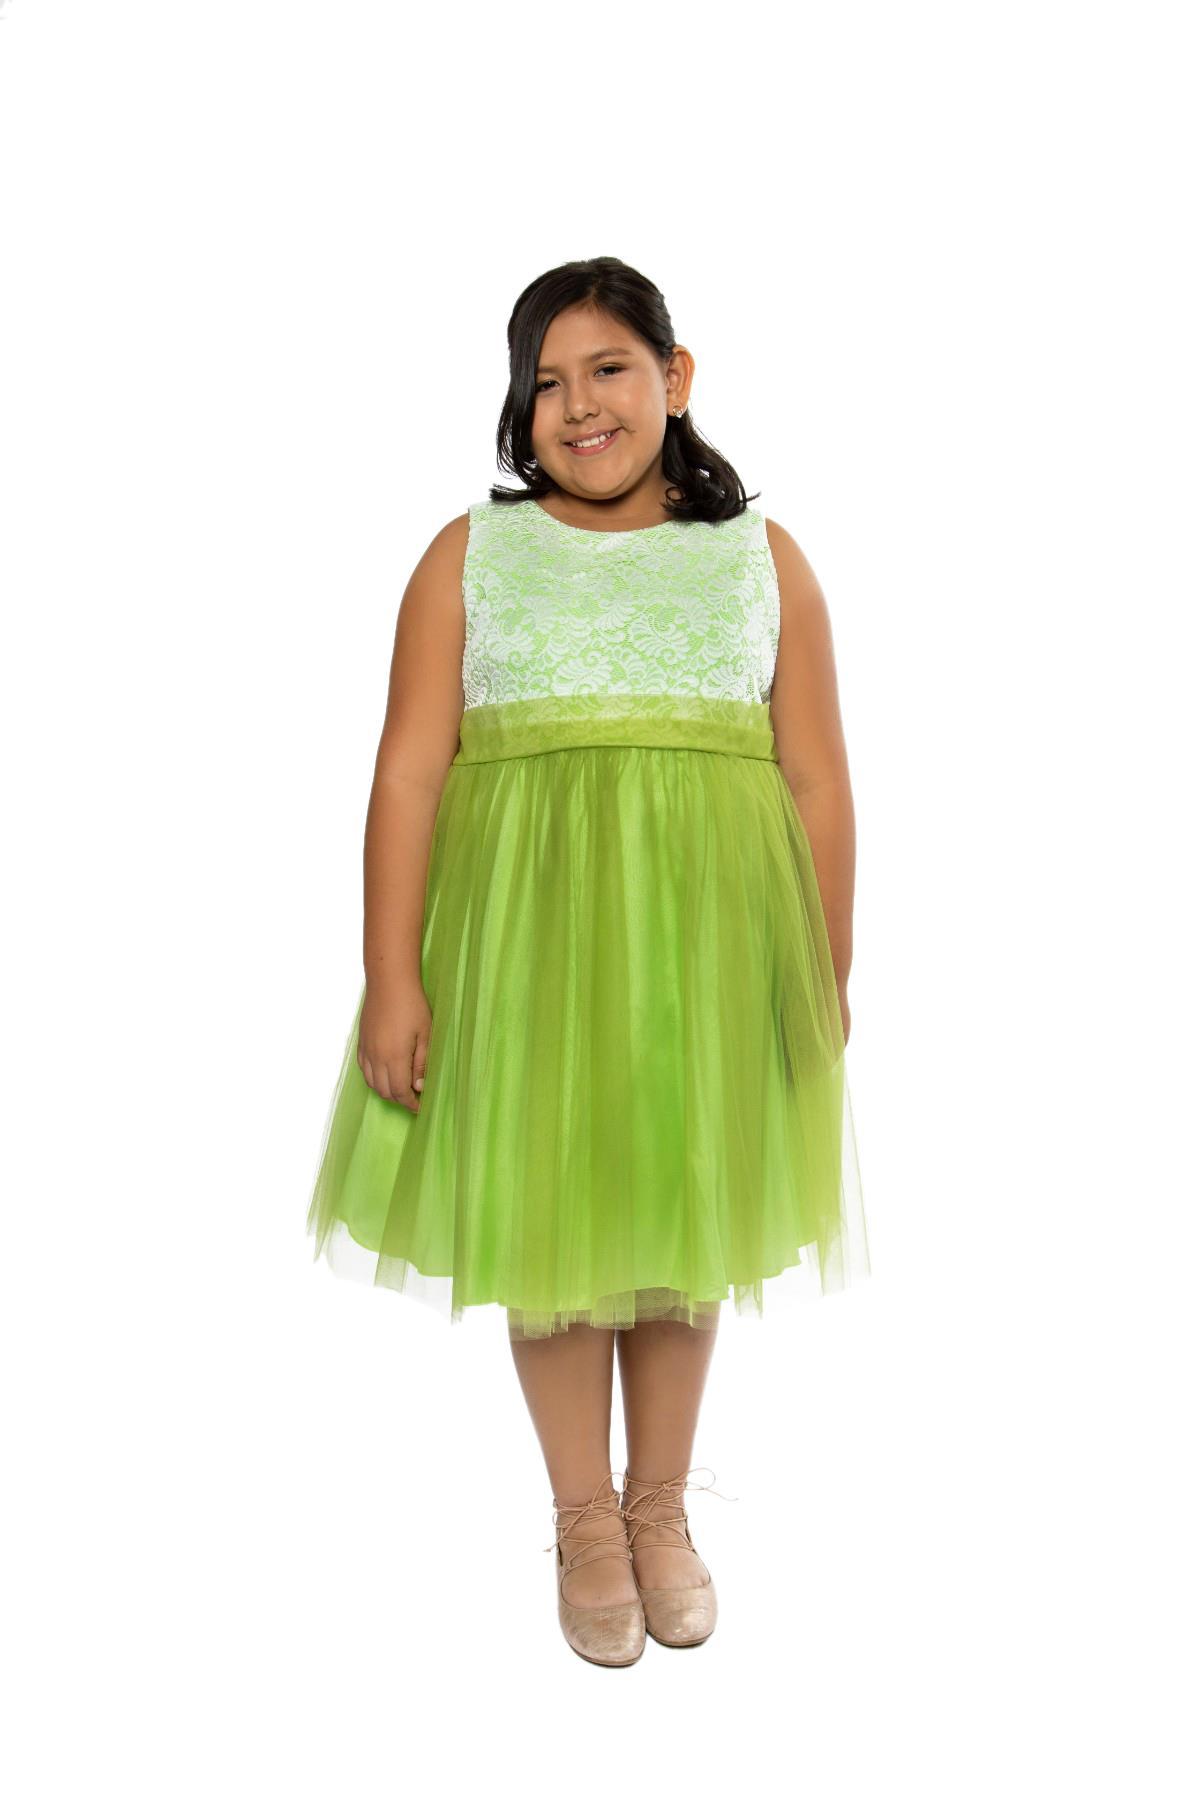 The Best Places To Buy Plus Size Clothes for Kids